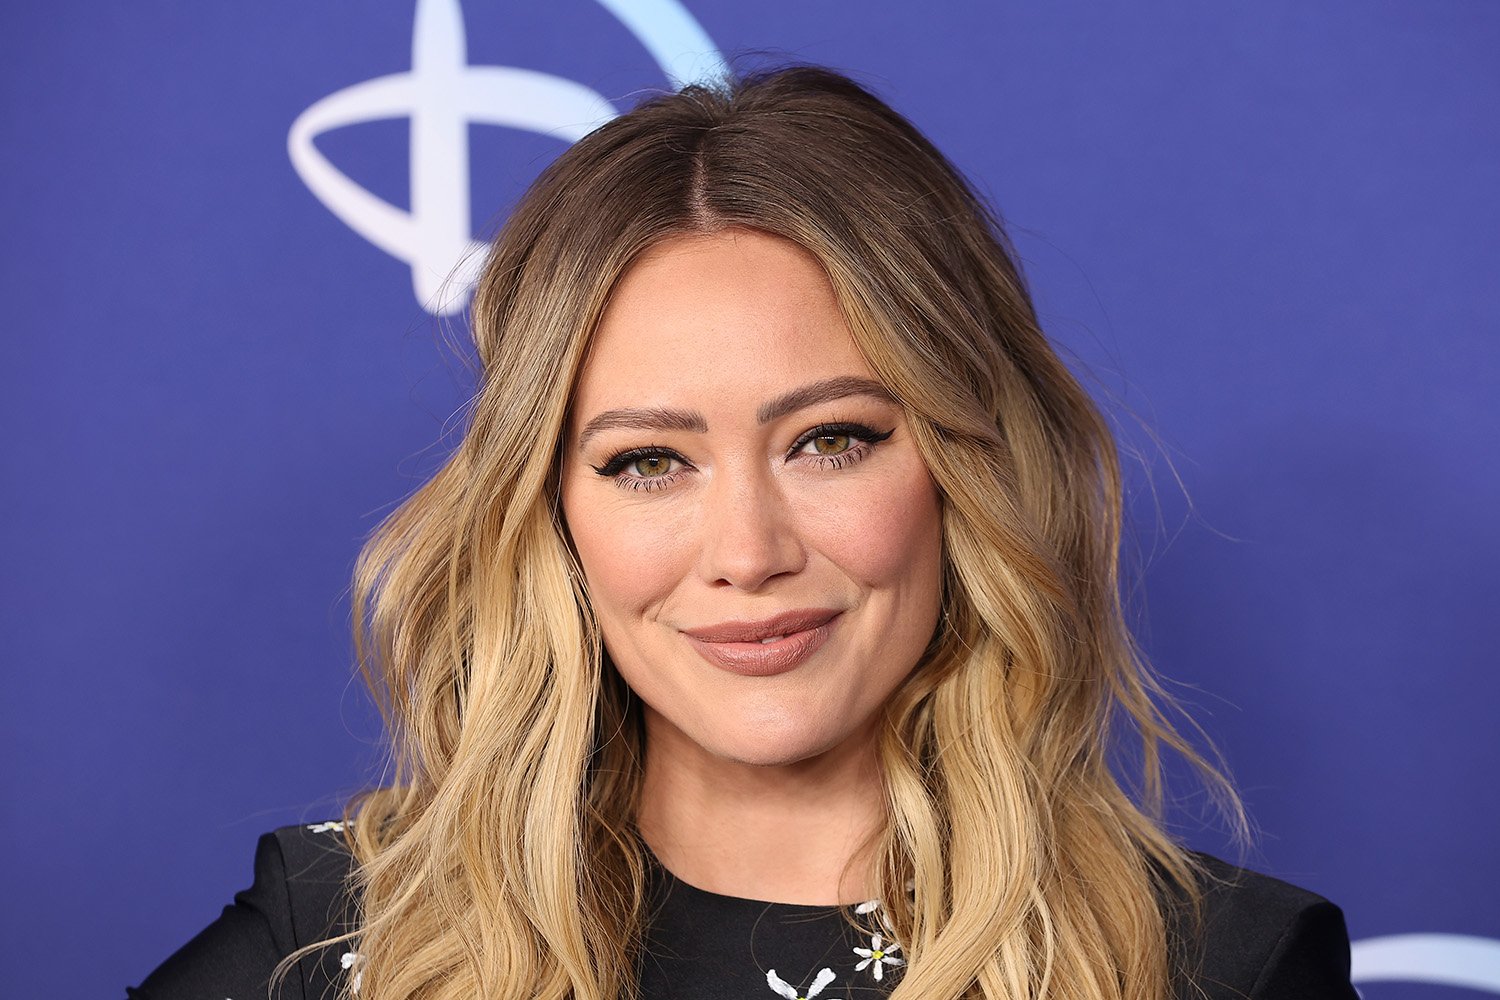 How I Met Your Father star Hilary Duff attends the ABC Disney Upfront